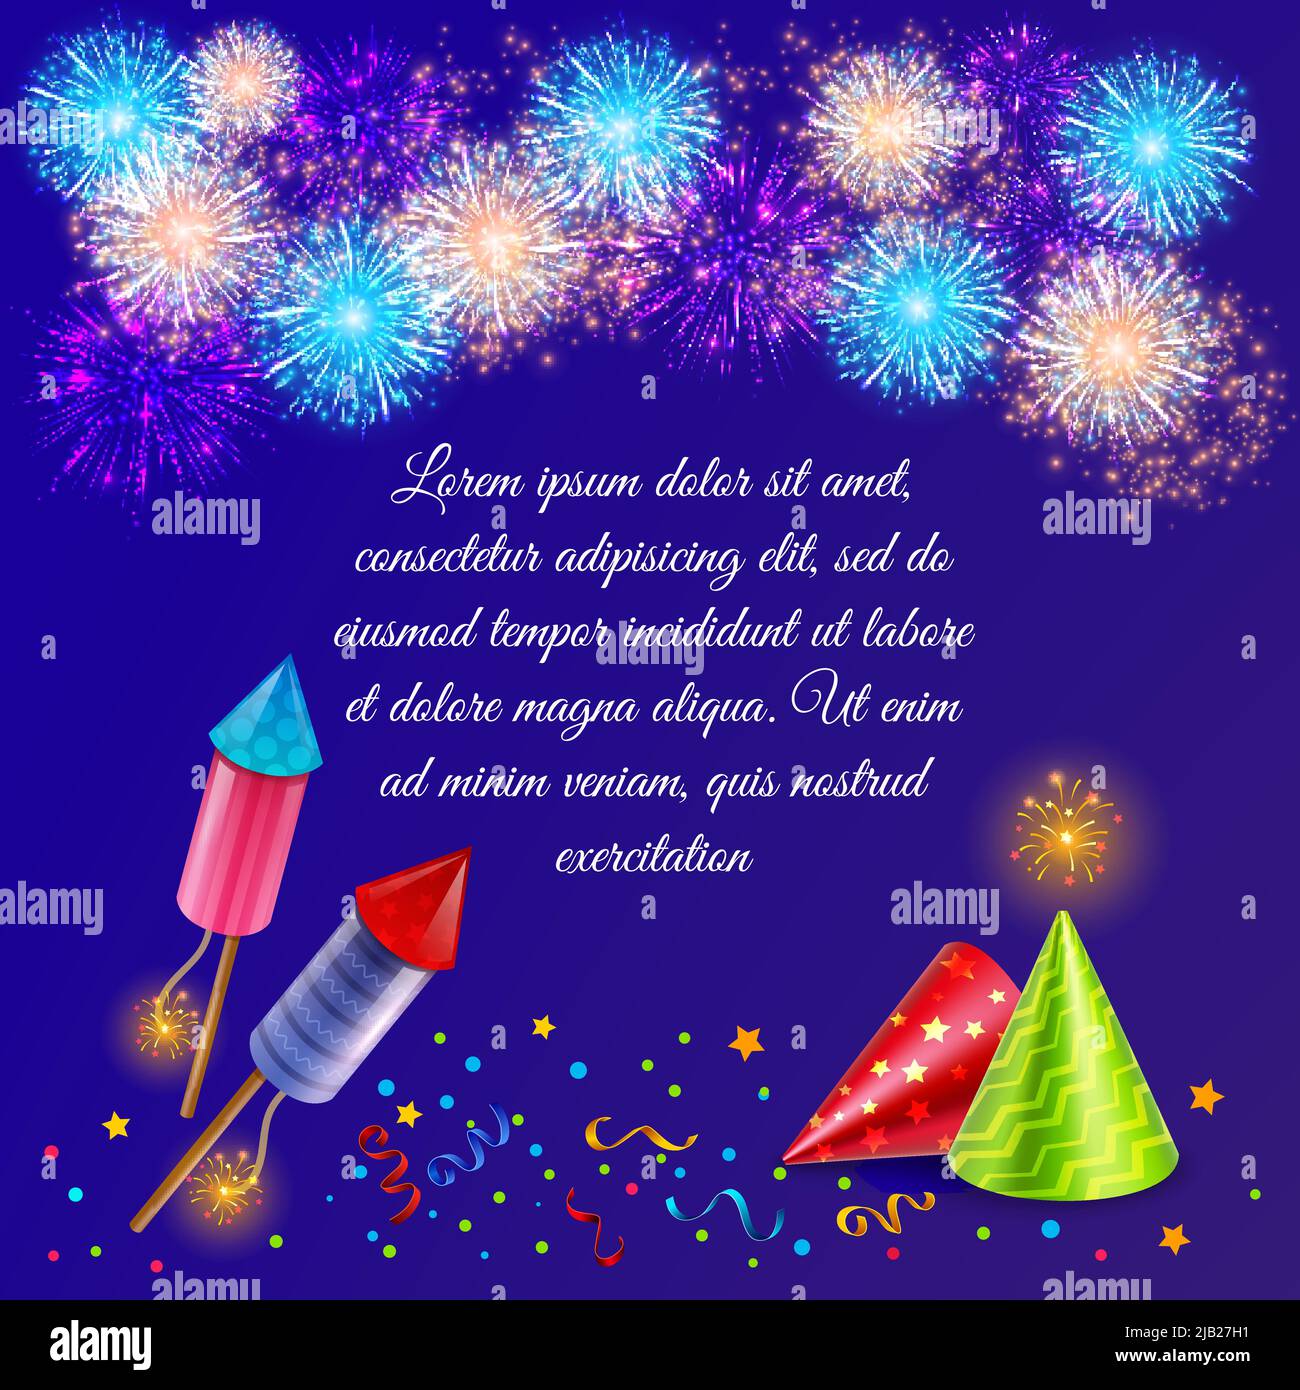 Fireworks background composition with ornate firework display images of firecrackers party hats and confetti with text vector illustration Stock Vector